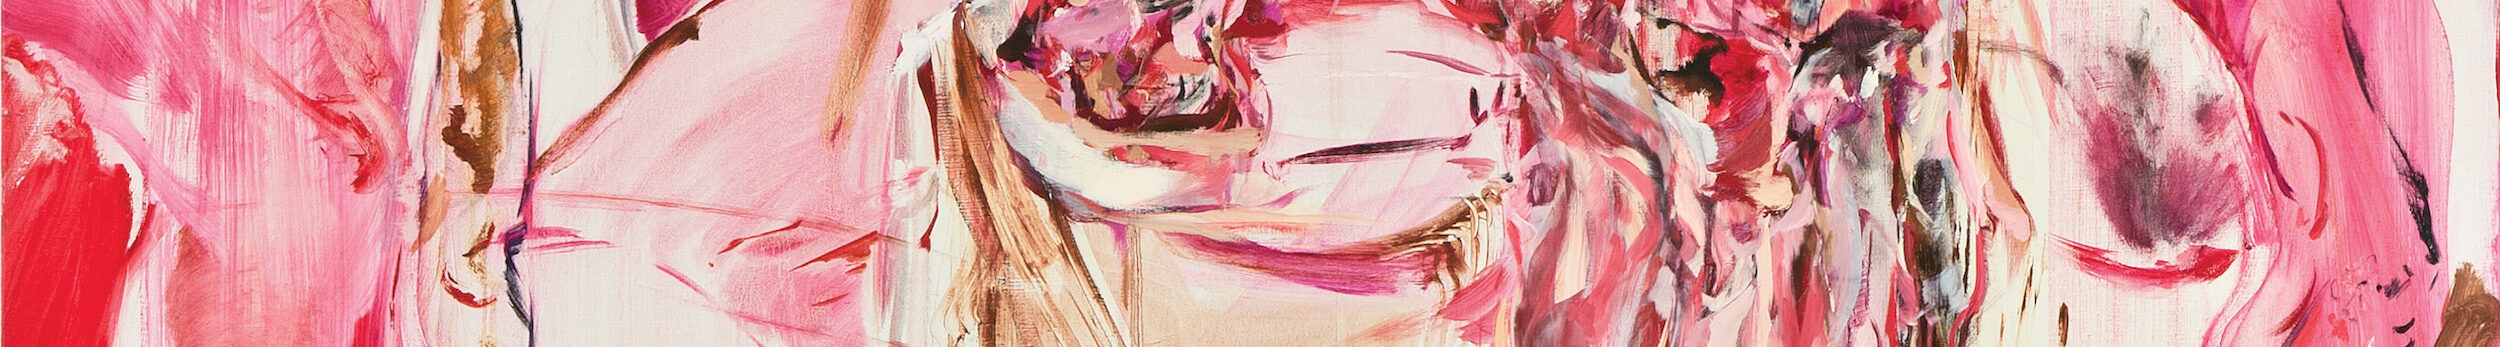 Abstract painting that depicts a reclining female nude using various shades of pink and white.